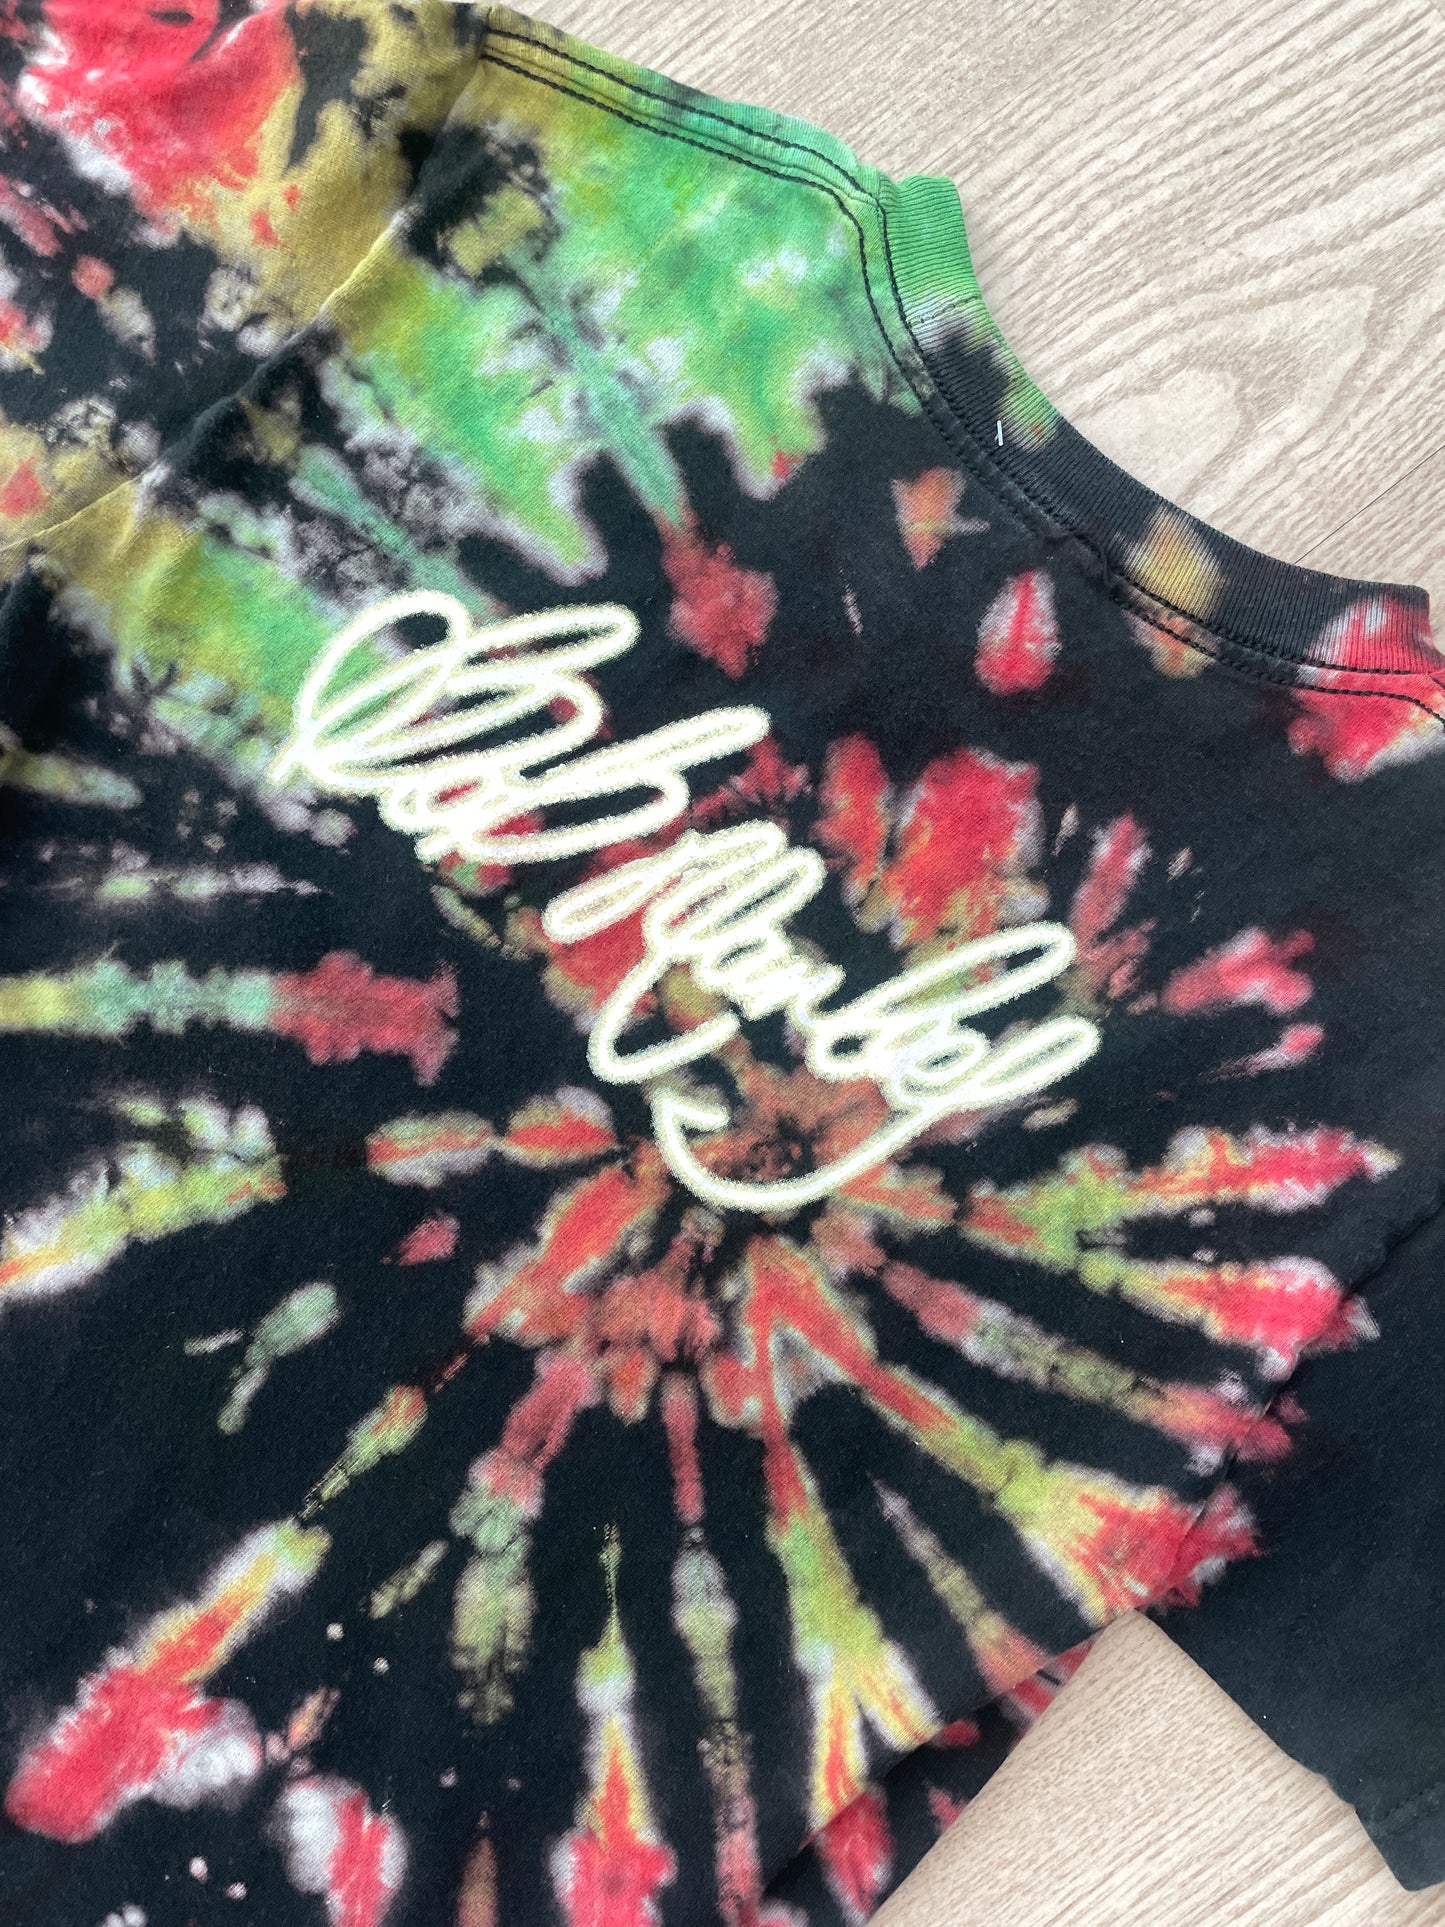 SMALL Men's Bob Marley Handmade Reverse Tie Dye Short Sleeve T-Shirt | One-Of-a-Kind Upcycled Red, Green, and Black Spiral Rasta Top